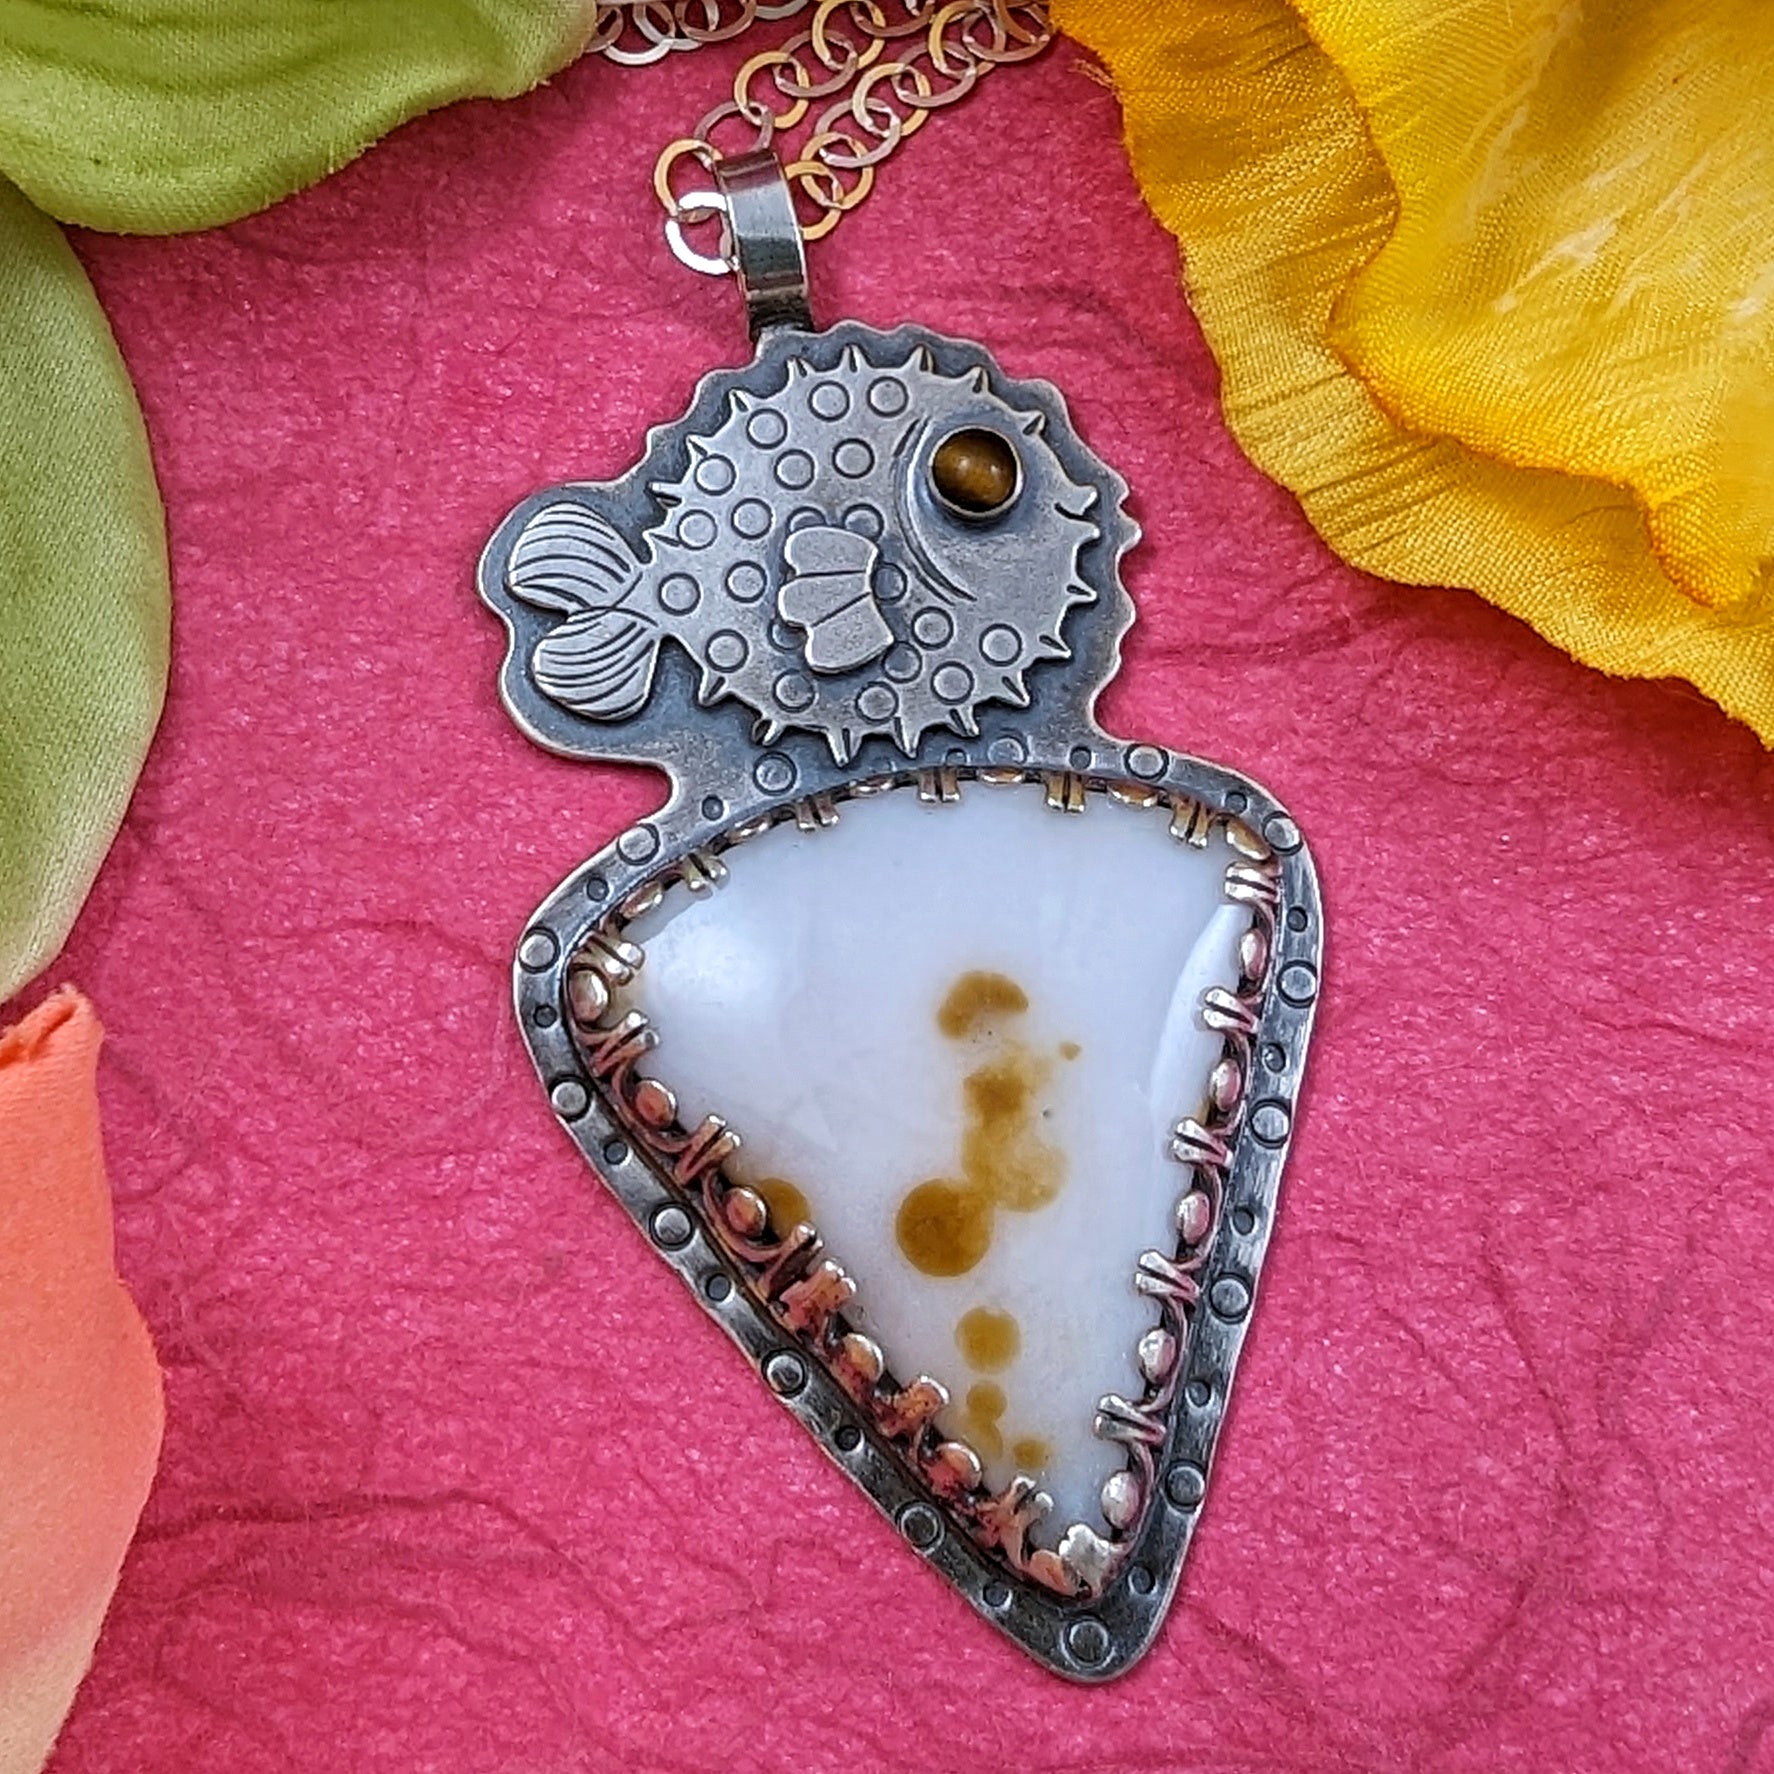 Polka dot agate stone with sterling silver puffer fish on top necklace